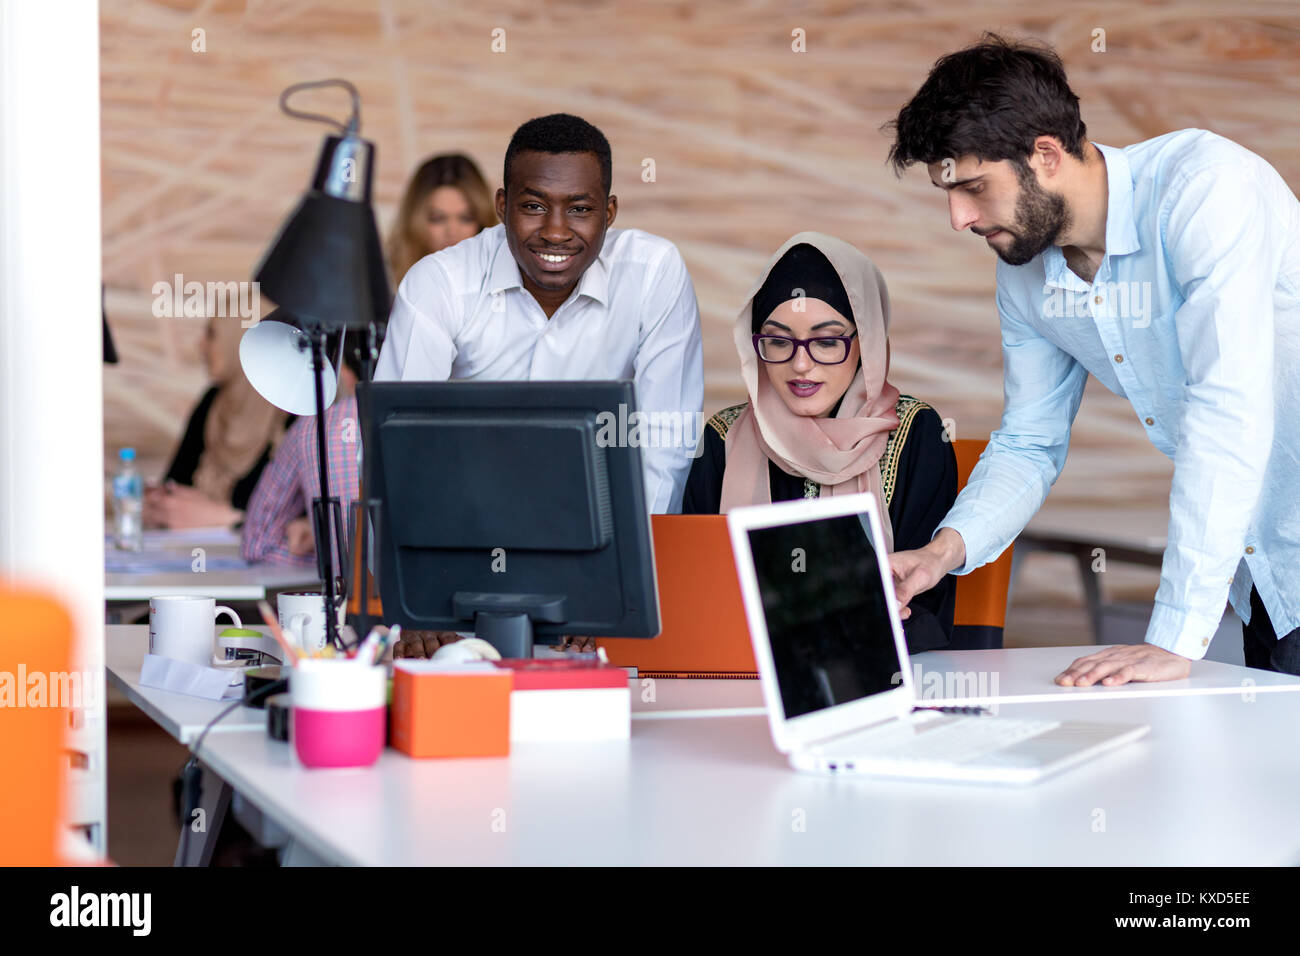 diverse college students using laptop and talking, learning exchanging ideas Stock Photo